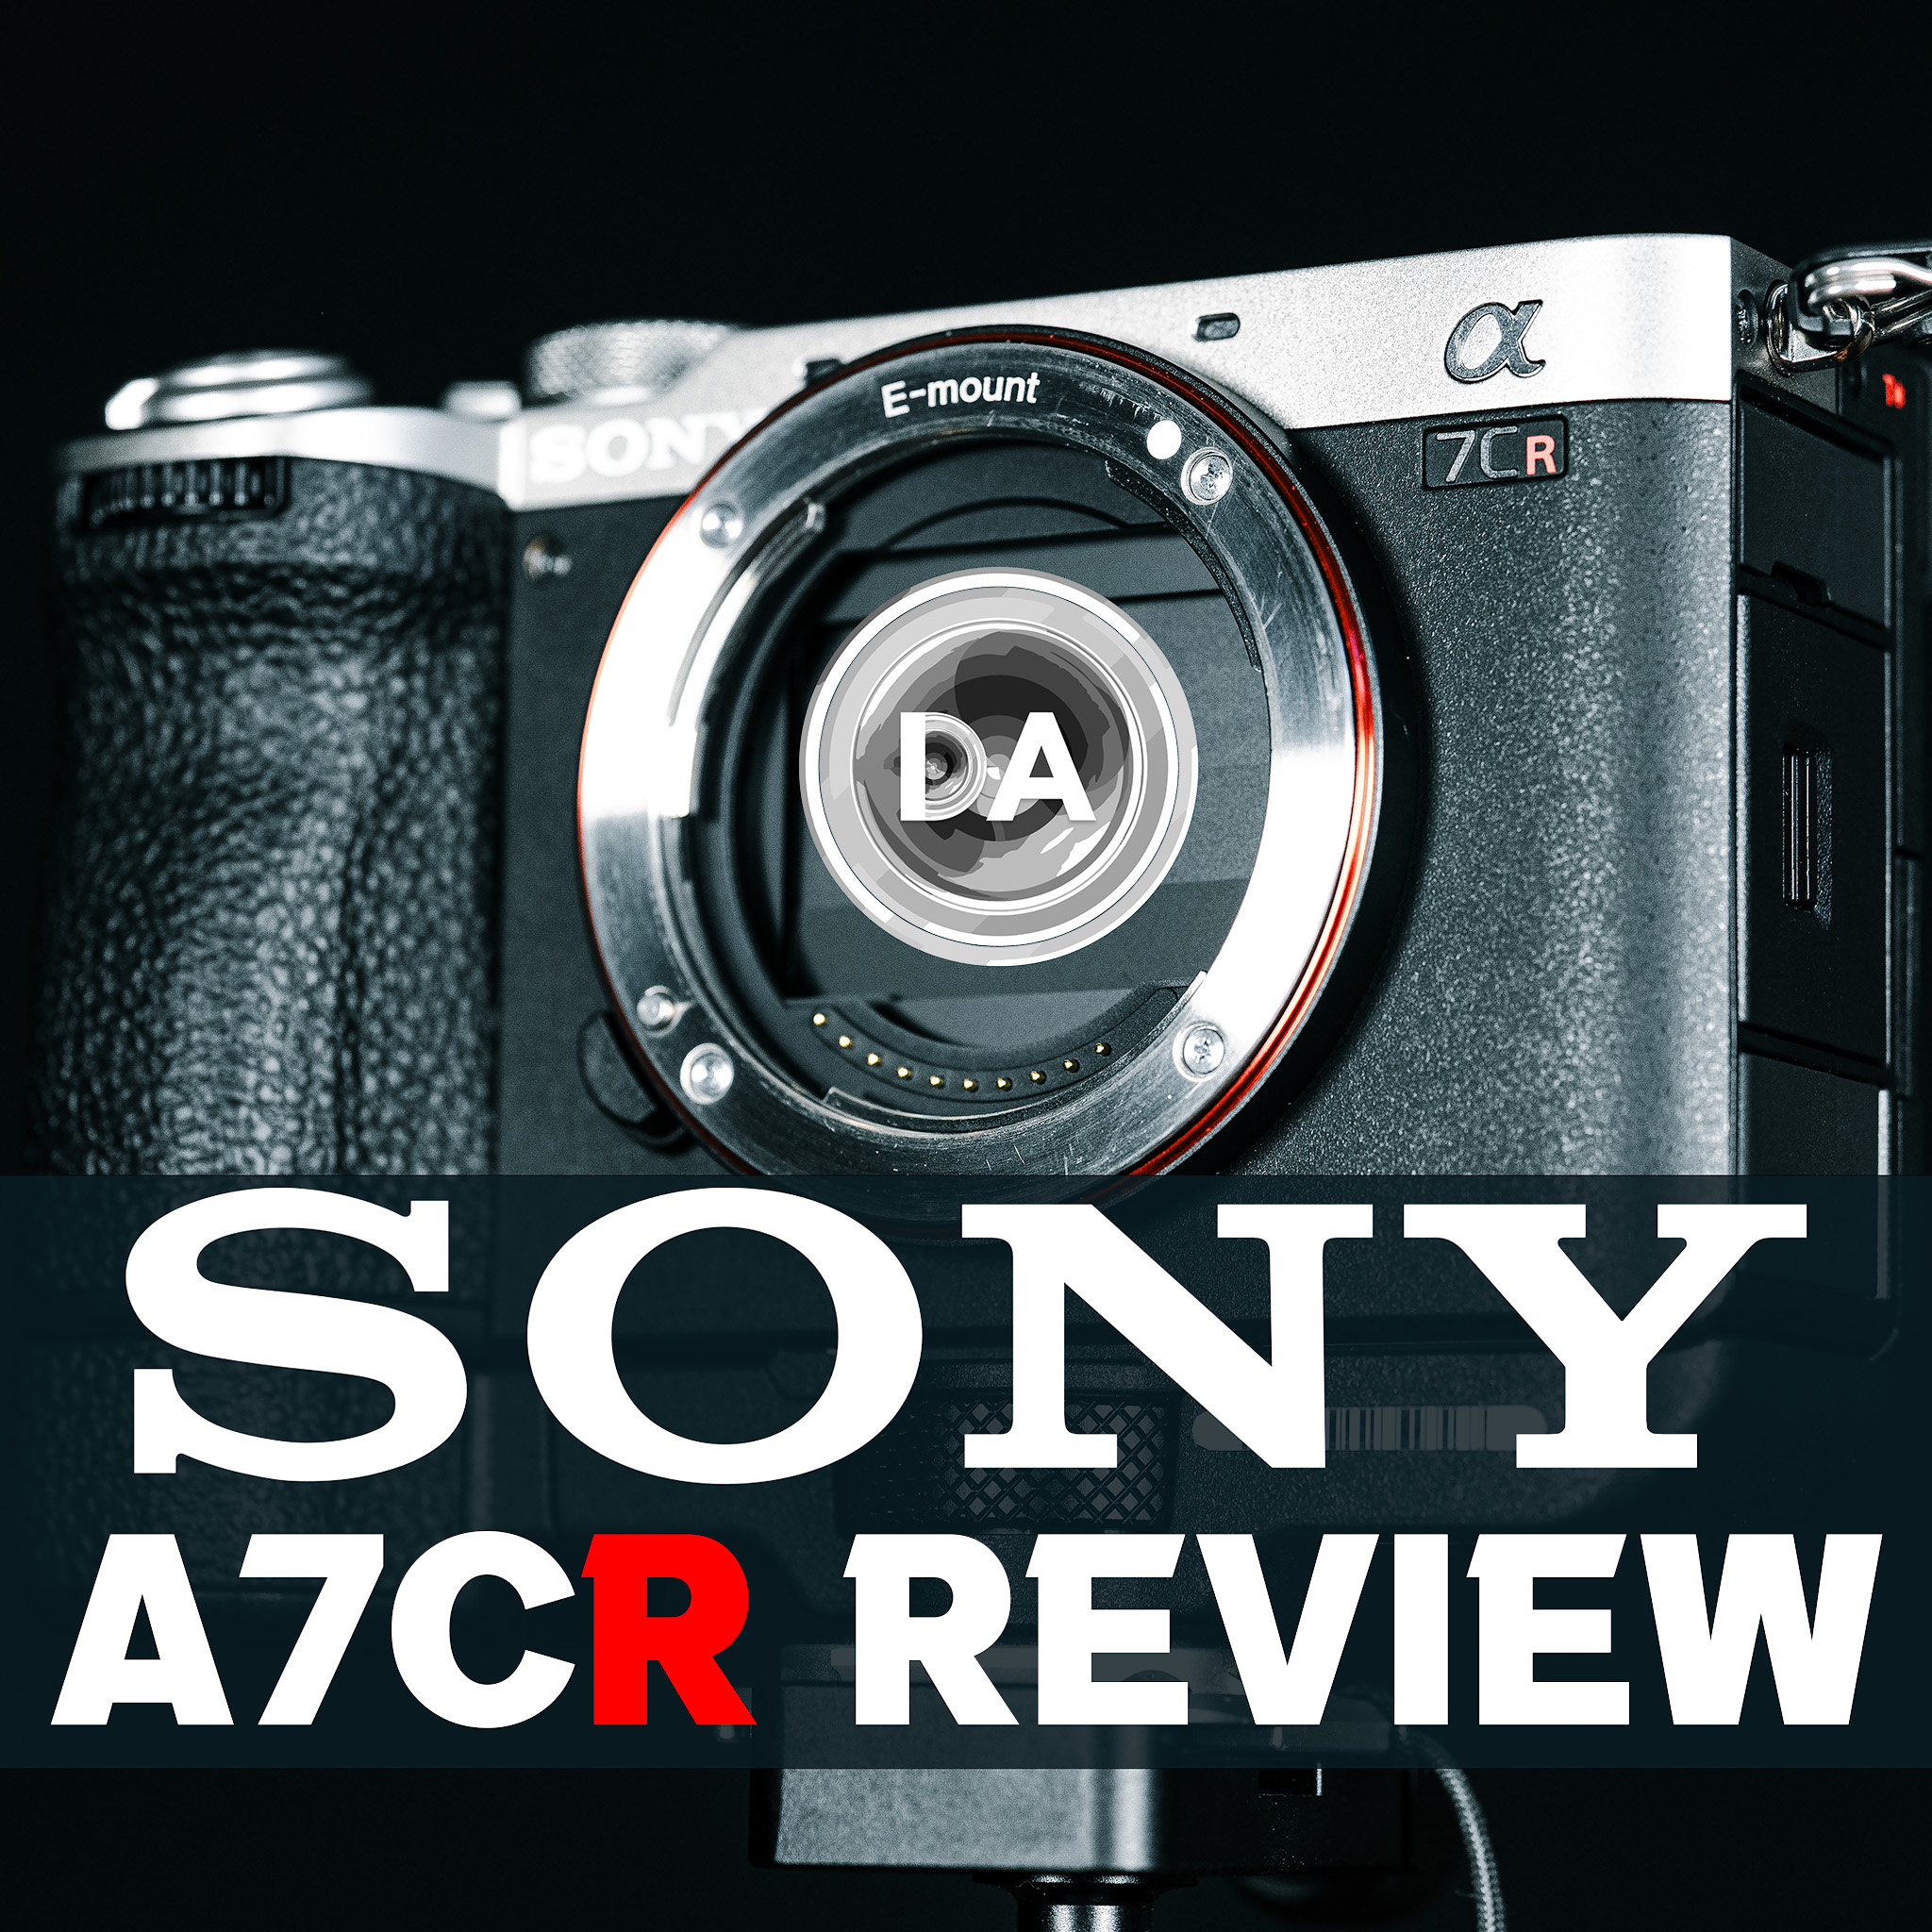 Sony's two new A7C series cameras offer premium features for less money